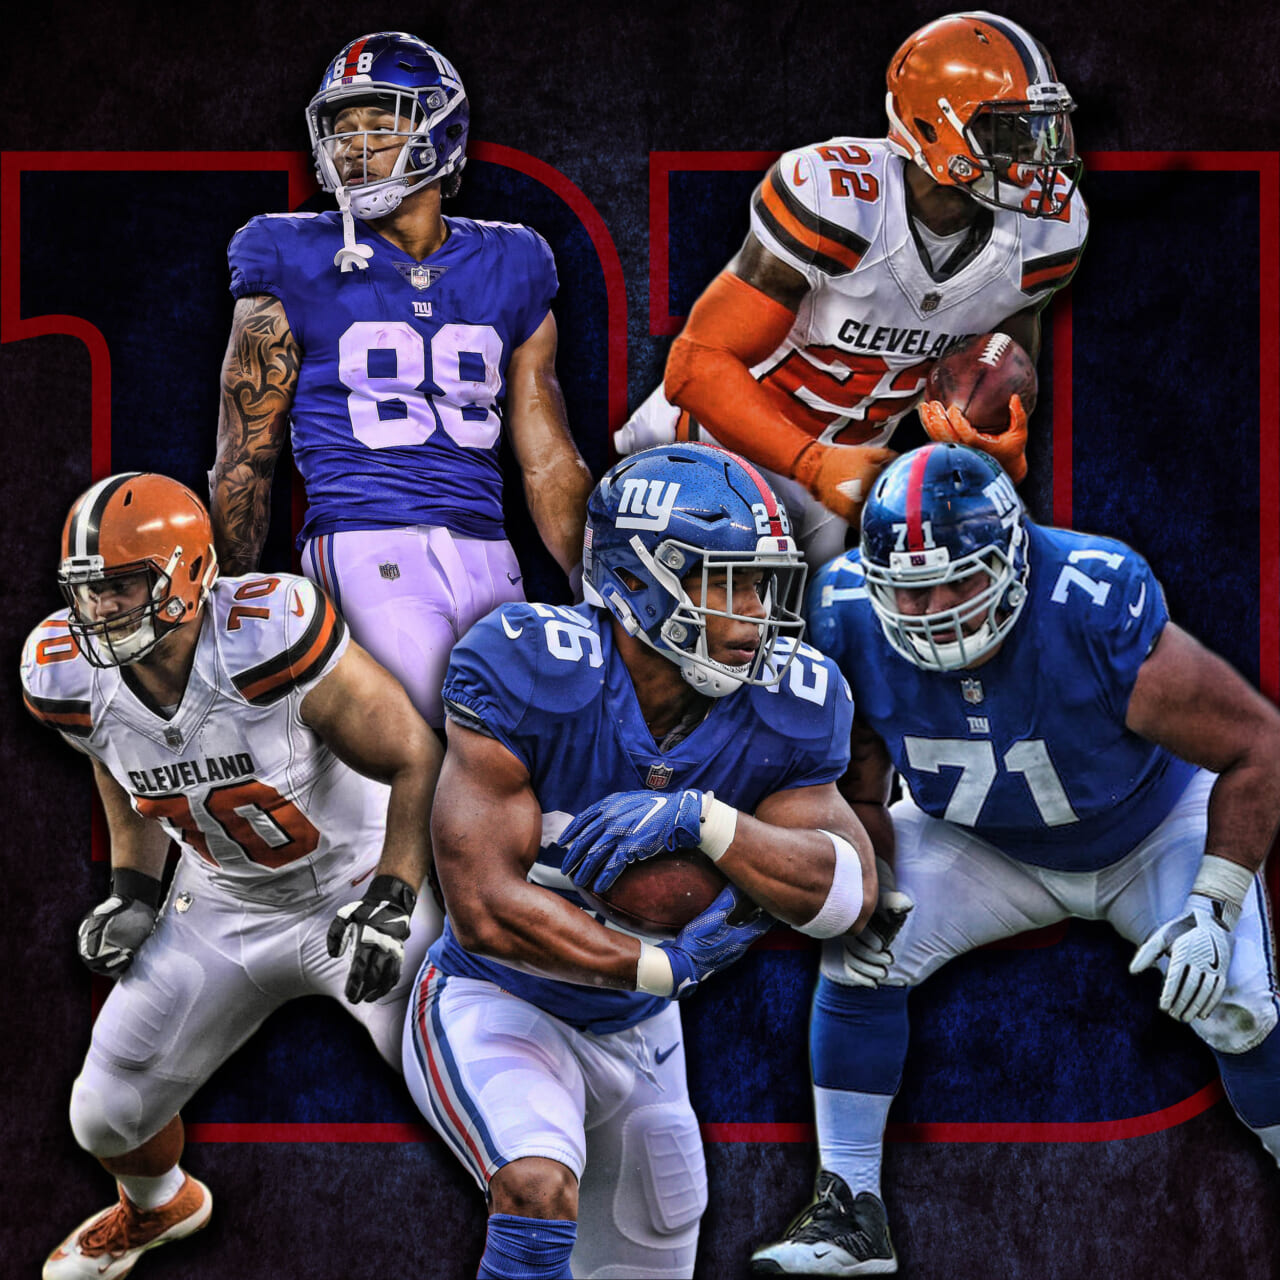 New York Giants: Who Are The Pro Bowl Talents?